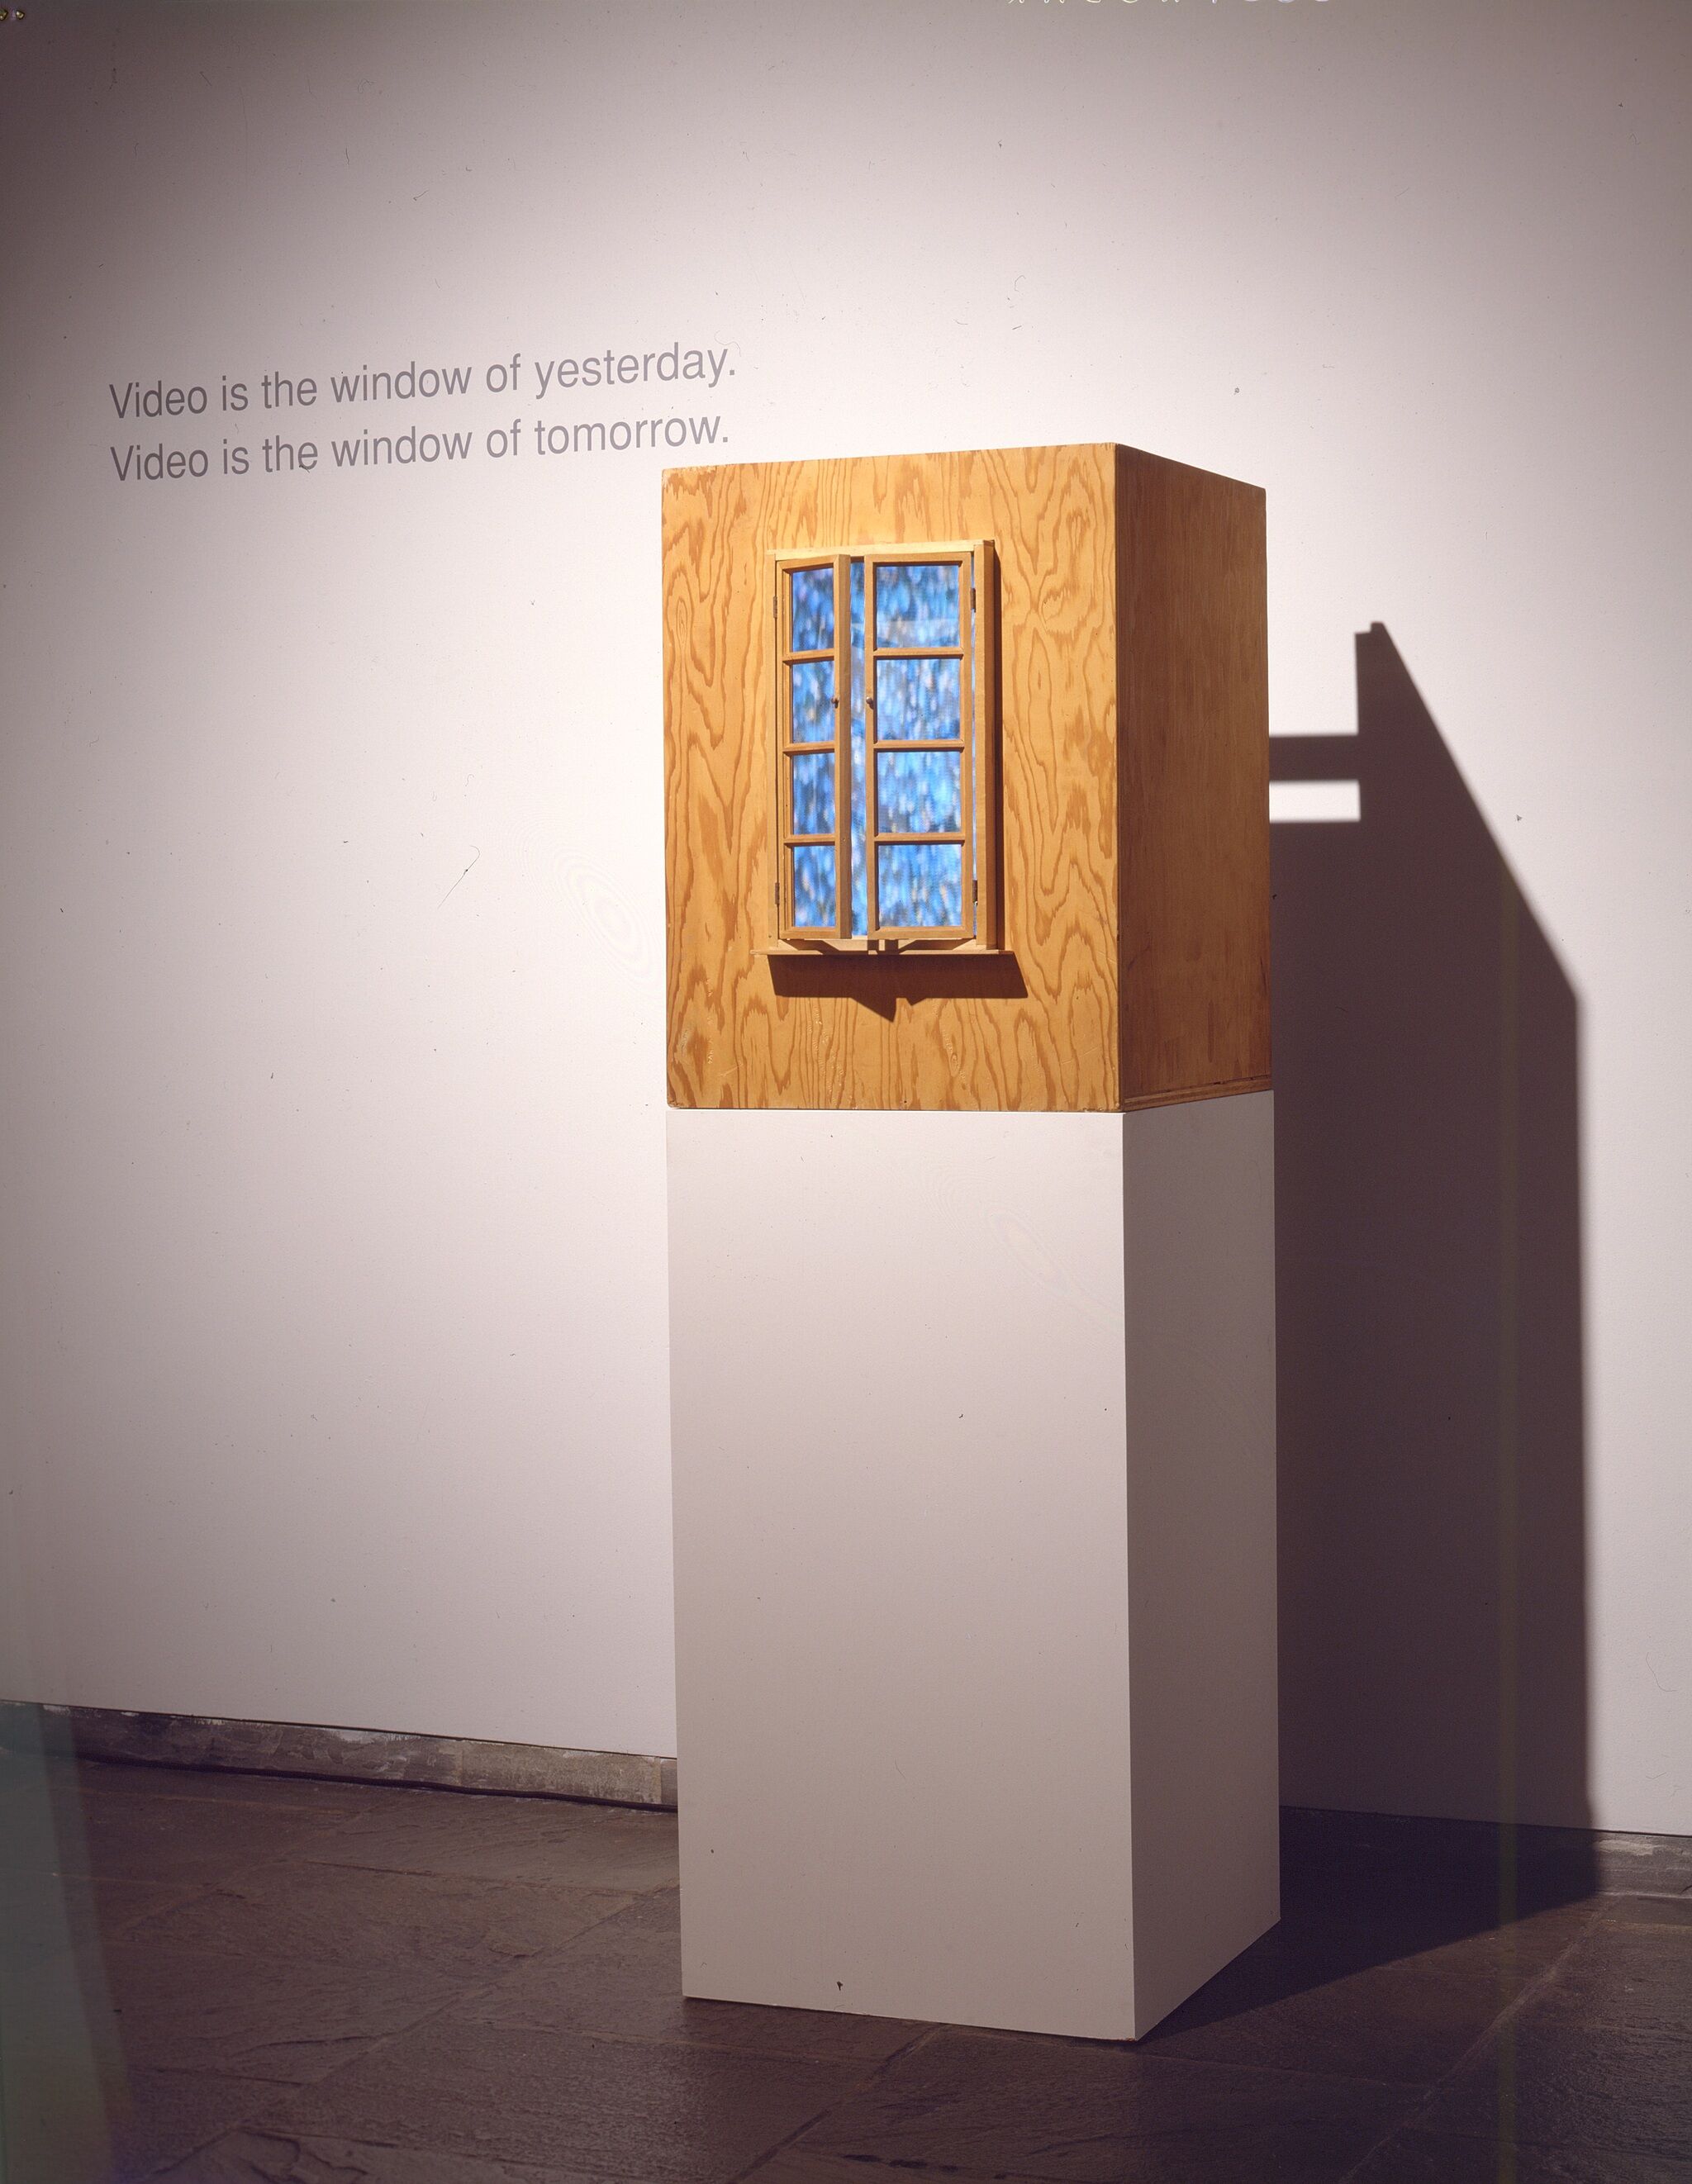 A wooden box with doors that open onto a screen.